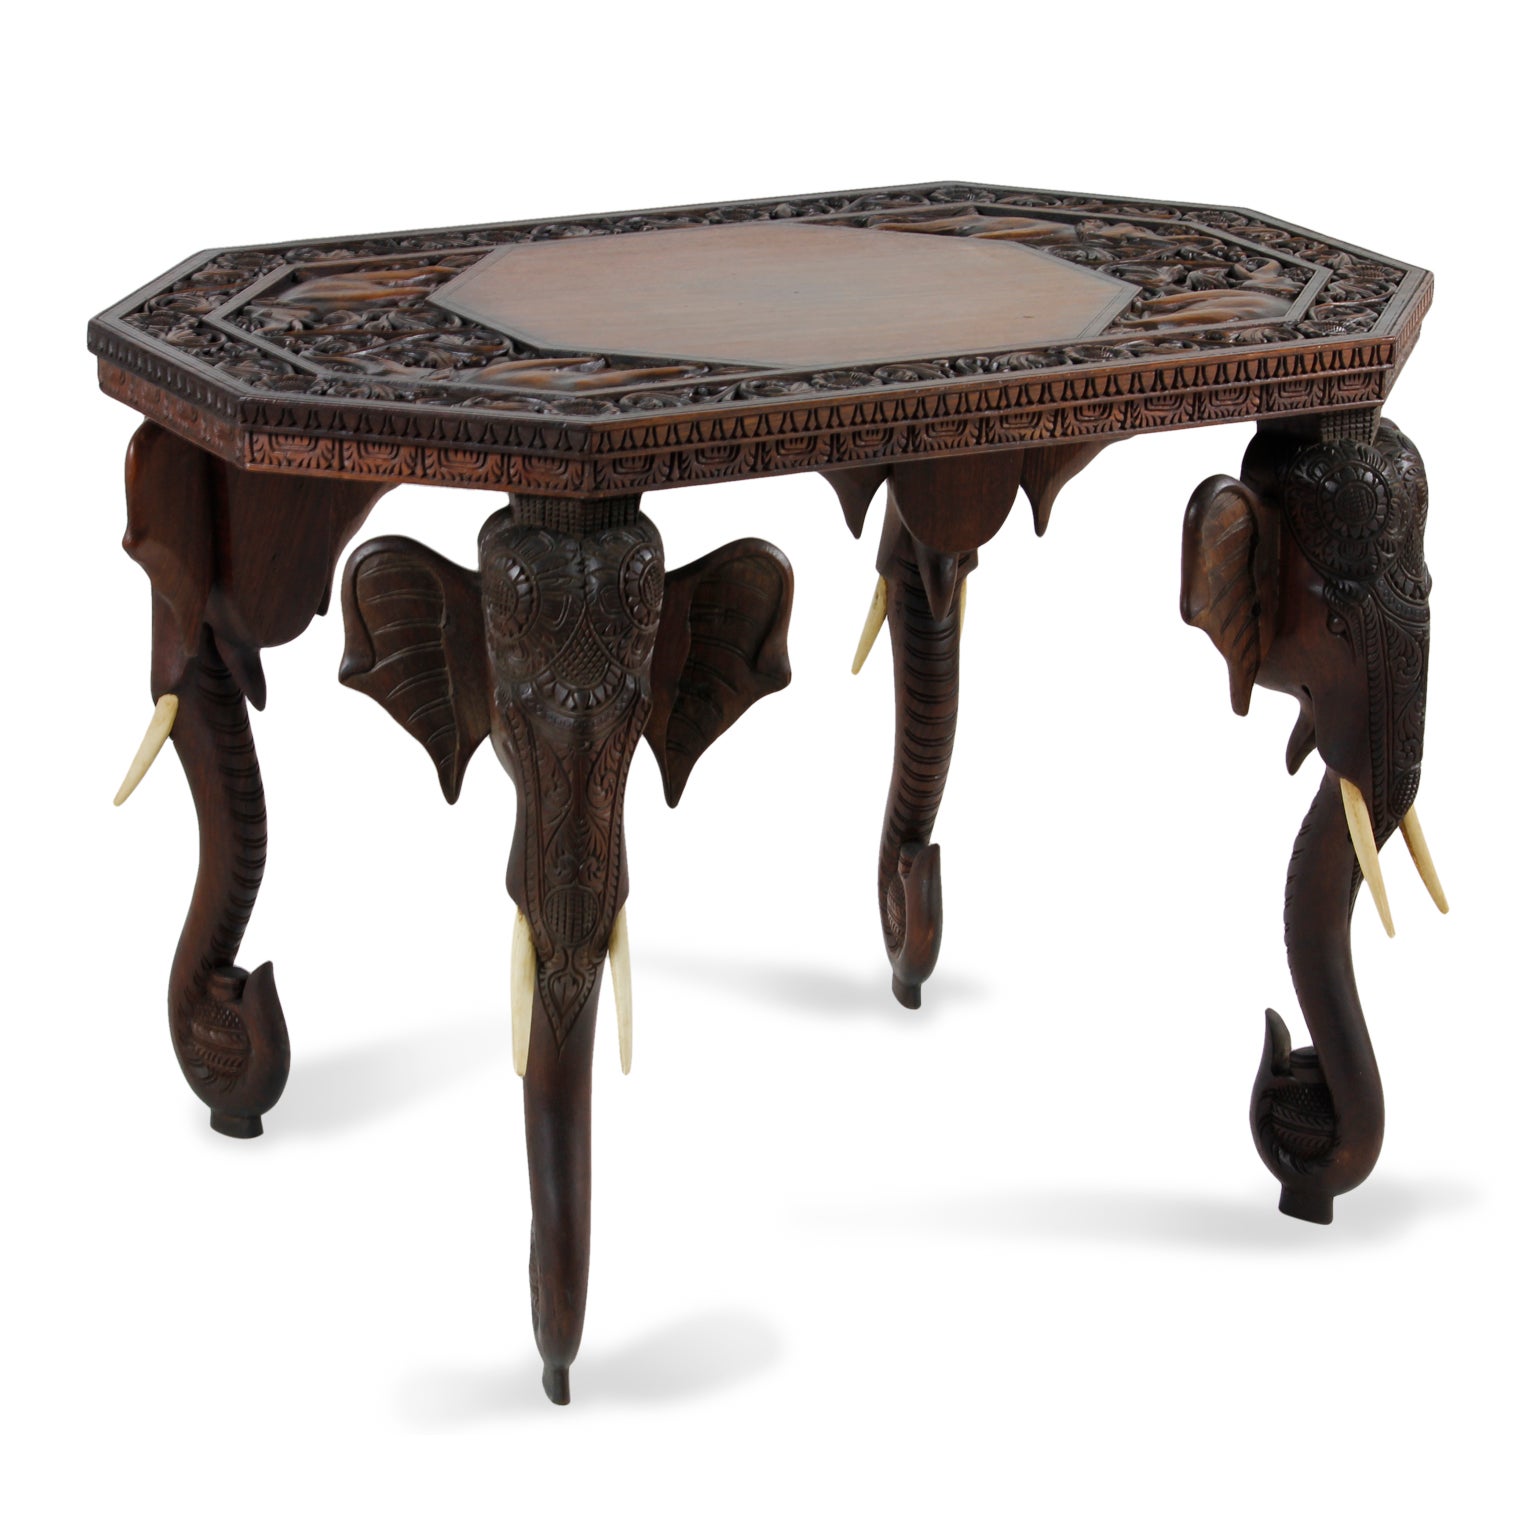 Anglo Indian or Burmese Elephant Motif Table